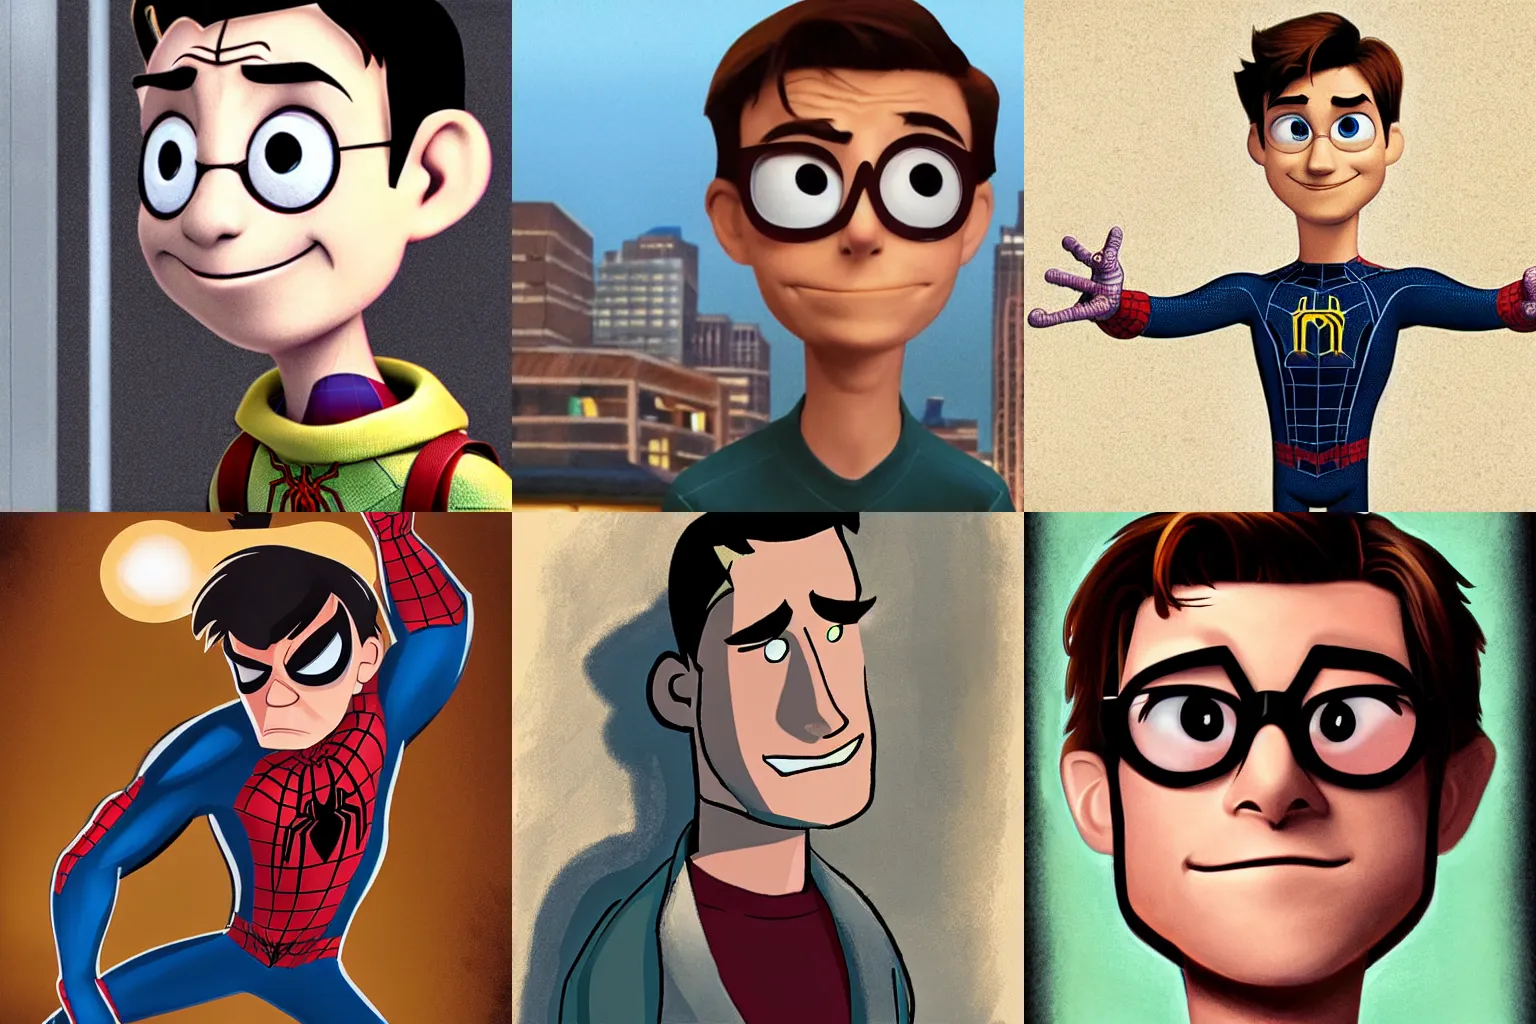 Prompt: Peter Parker as a Pixar character by Brad Bird